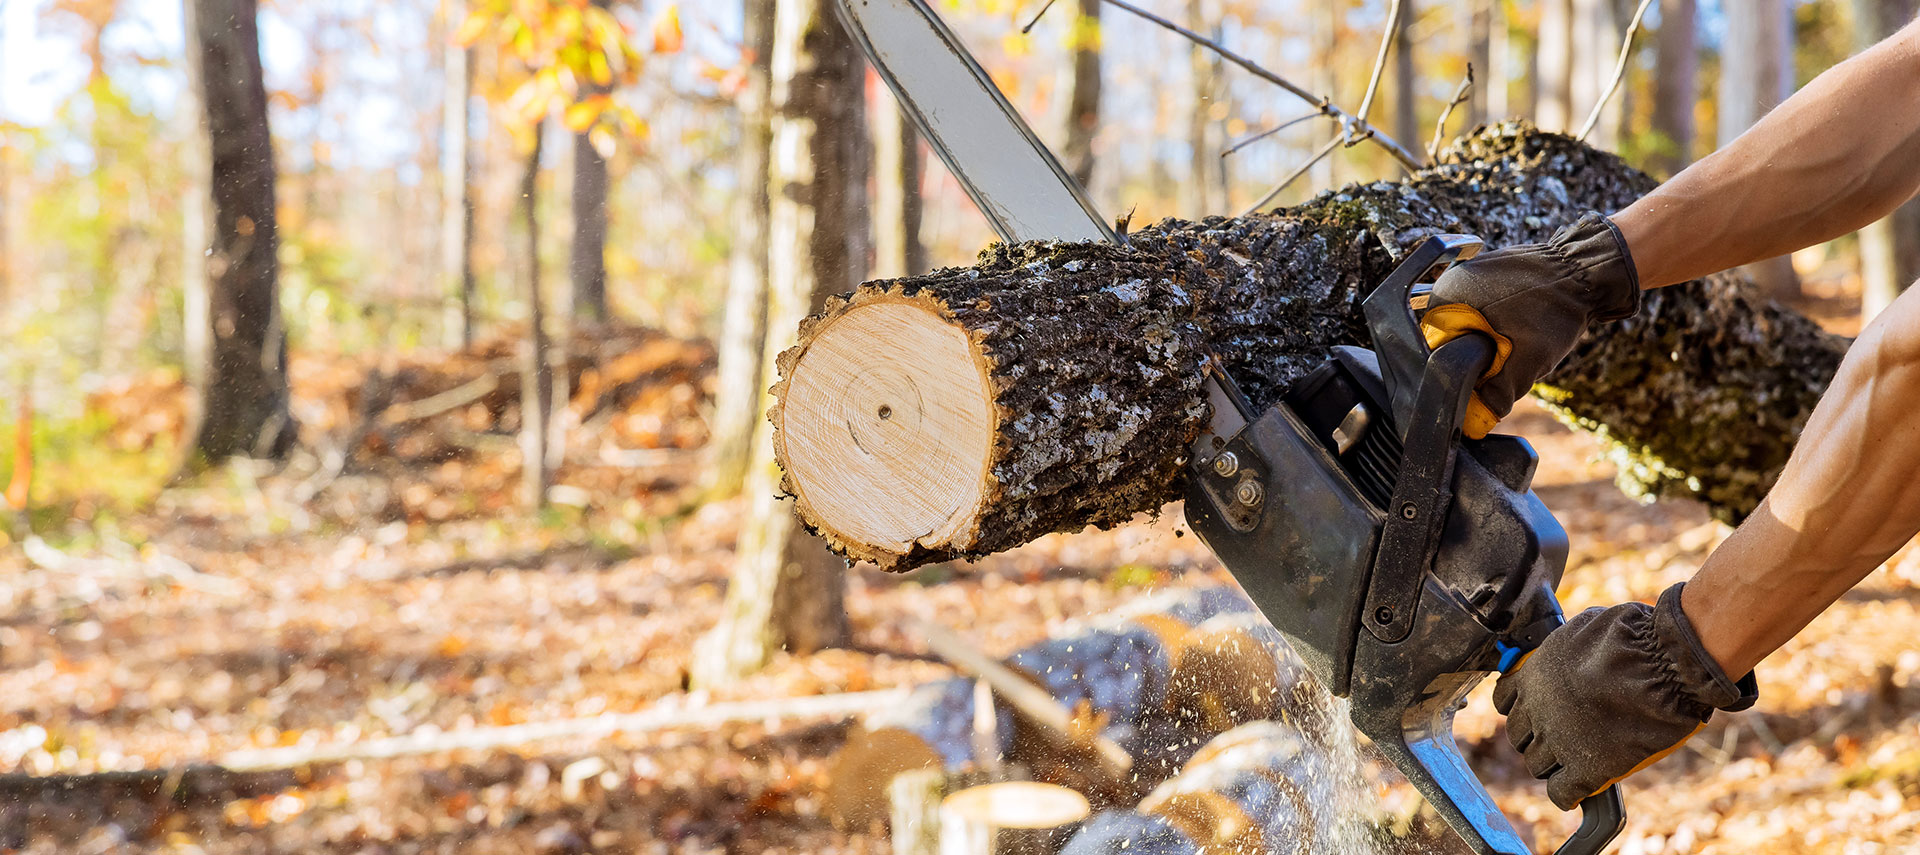 Professional Tree Service cutting a log with a chainsaw